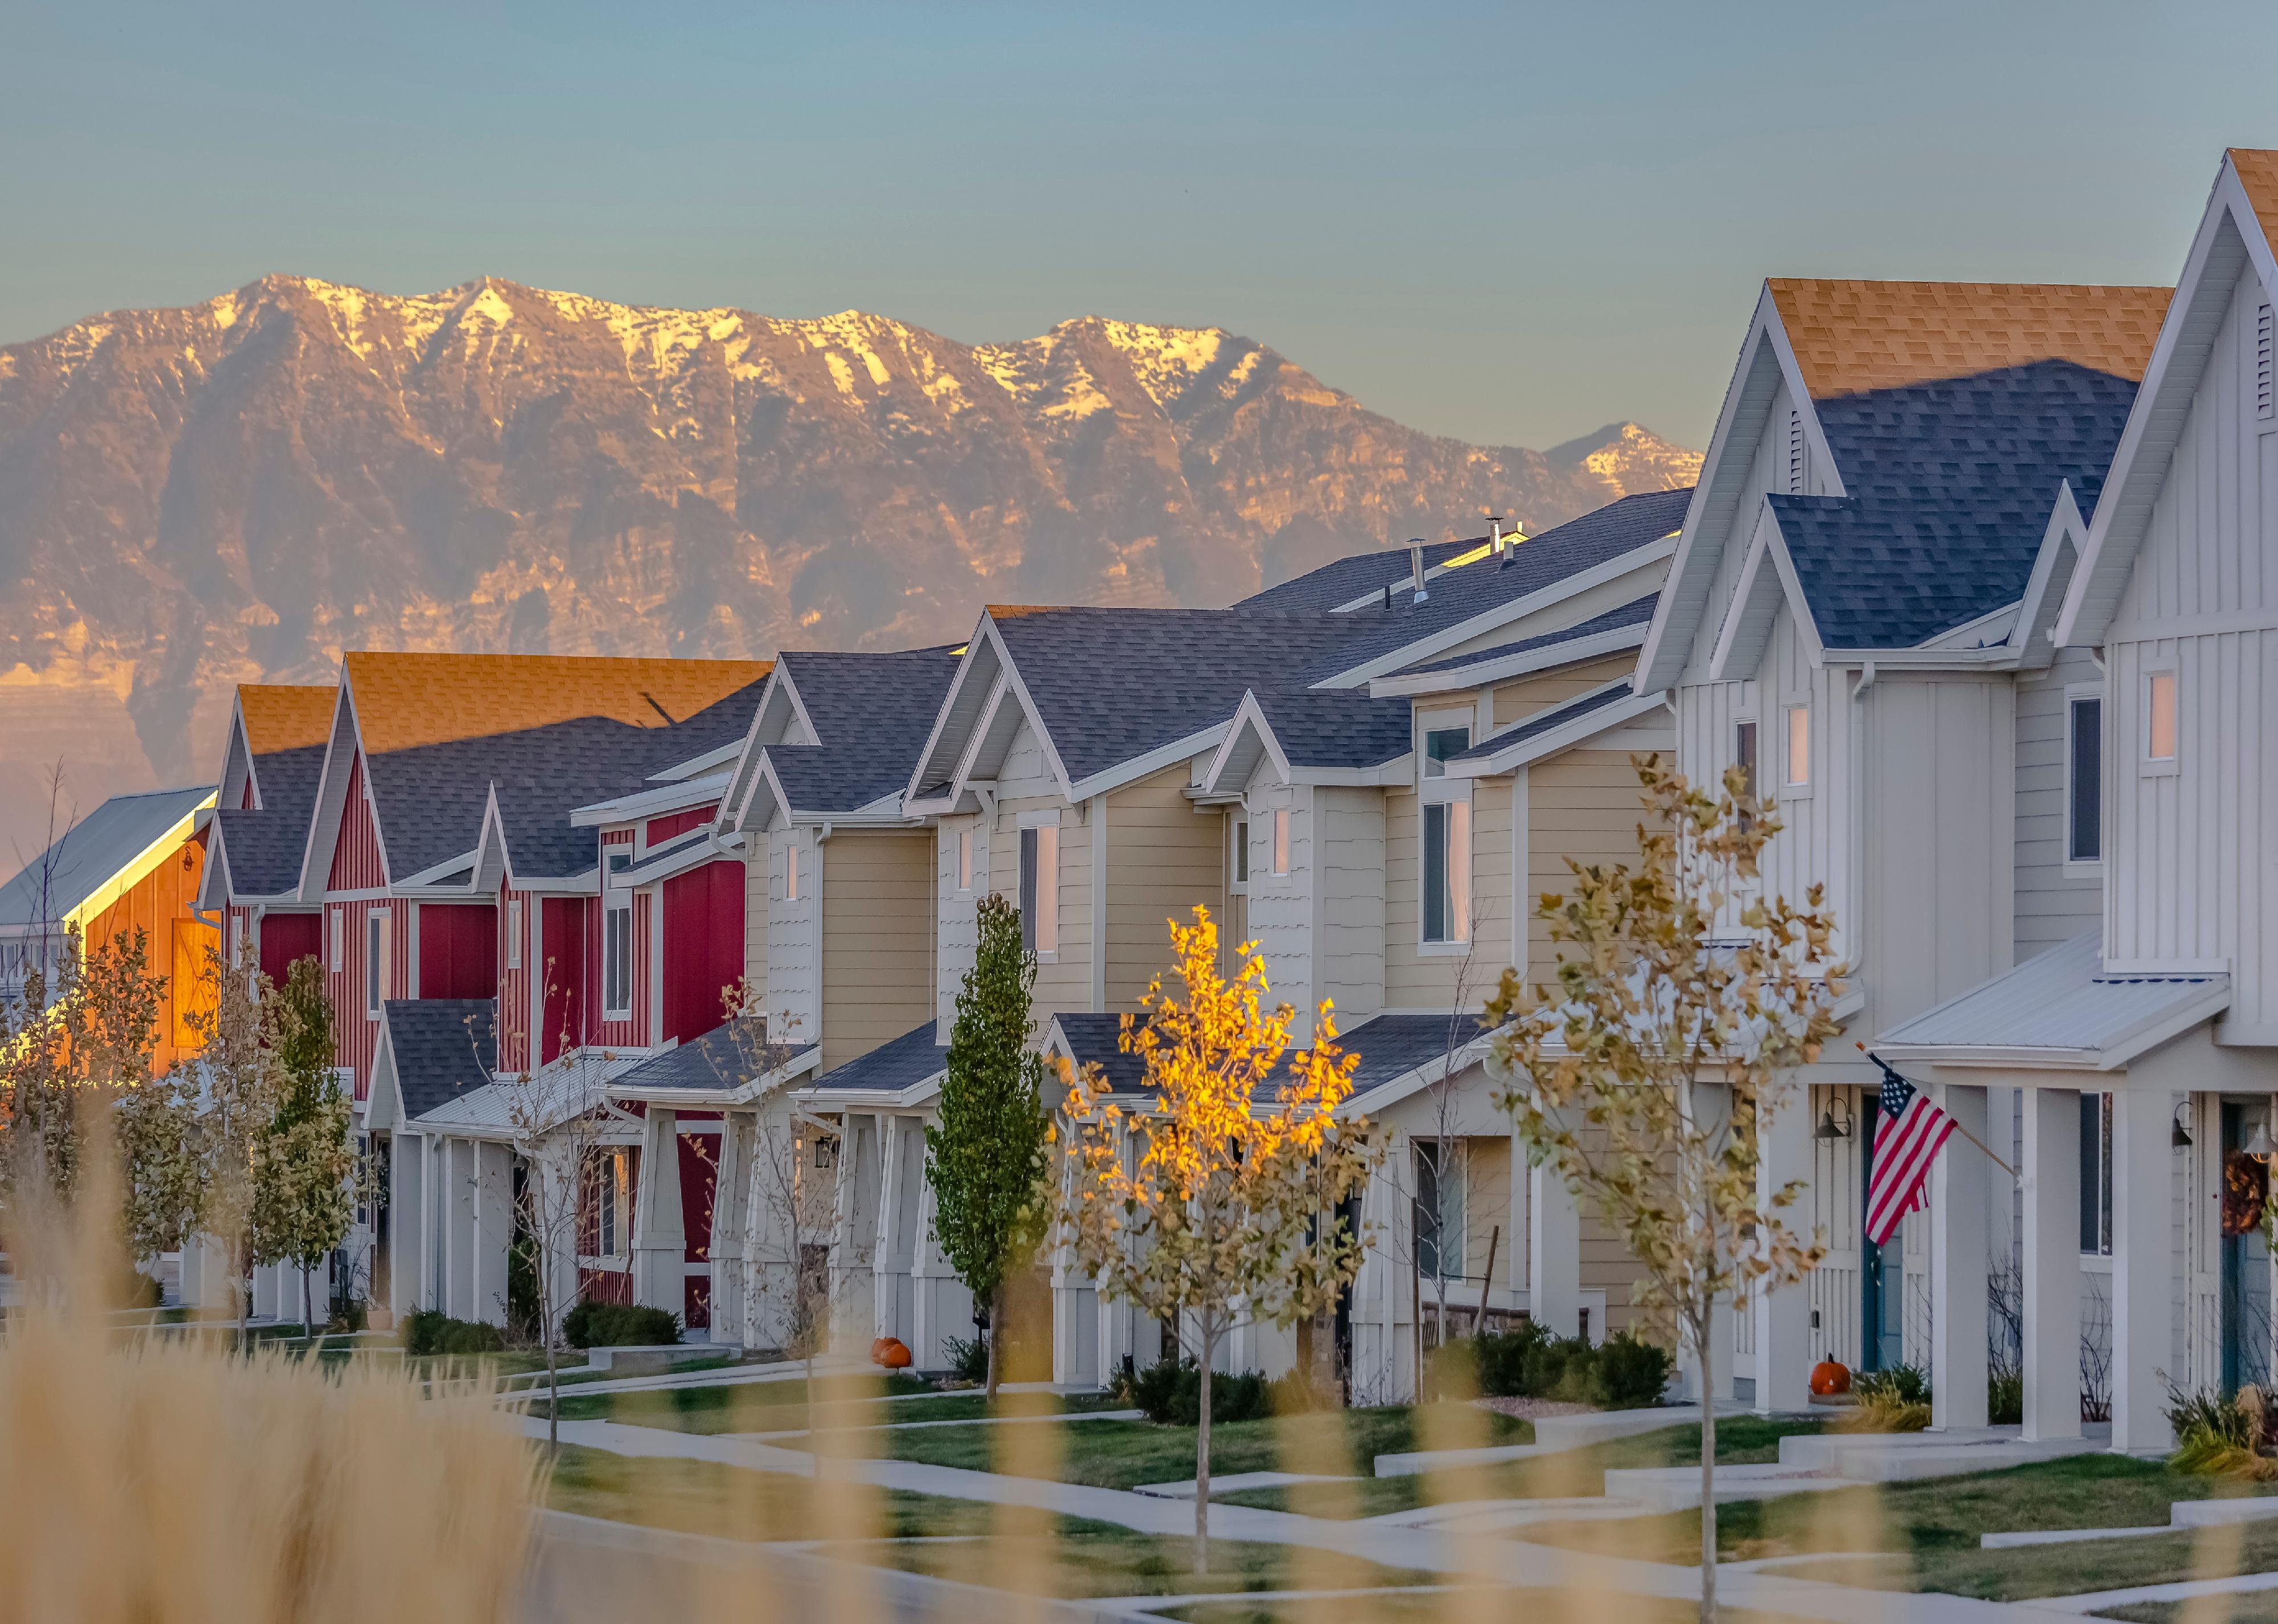 Townhomes in a row in Utah Valley suburbs.